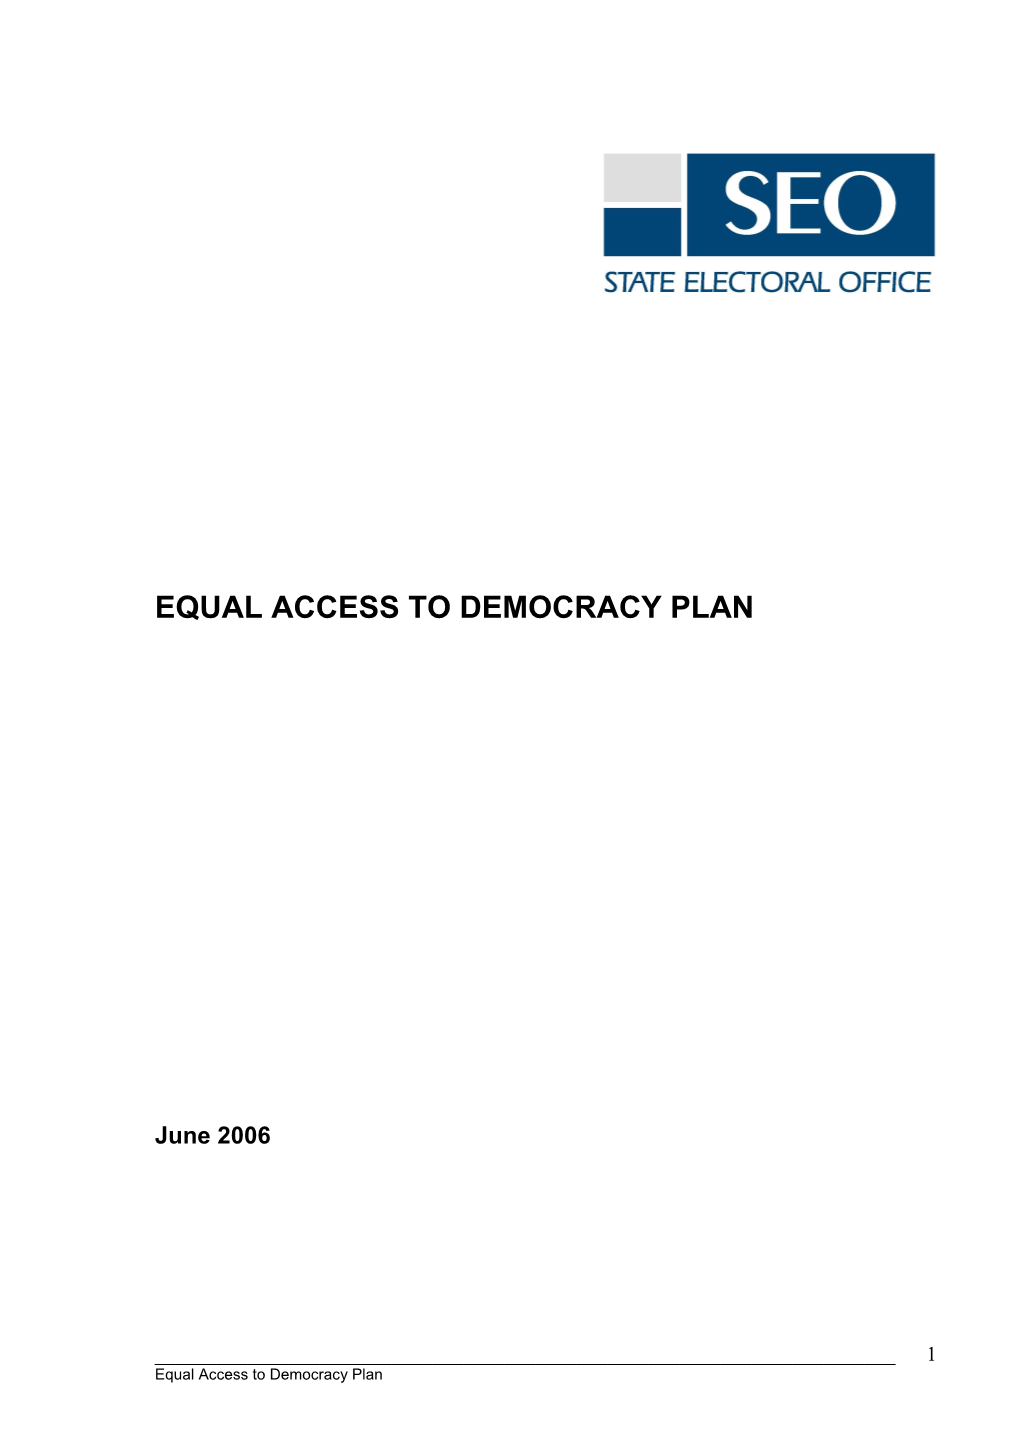 Equal Access to Democracy Plan Proposed Framework